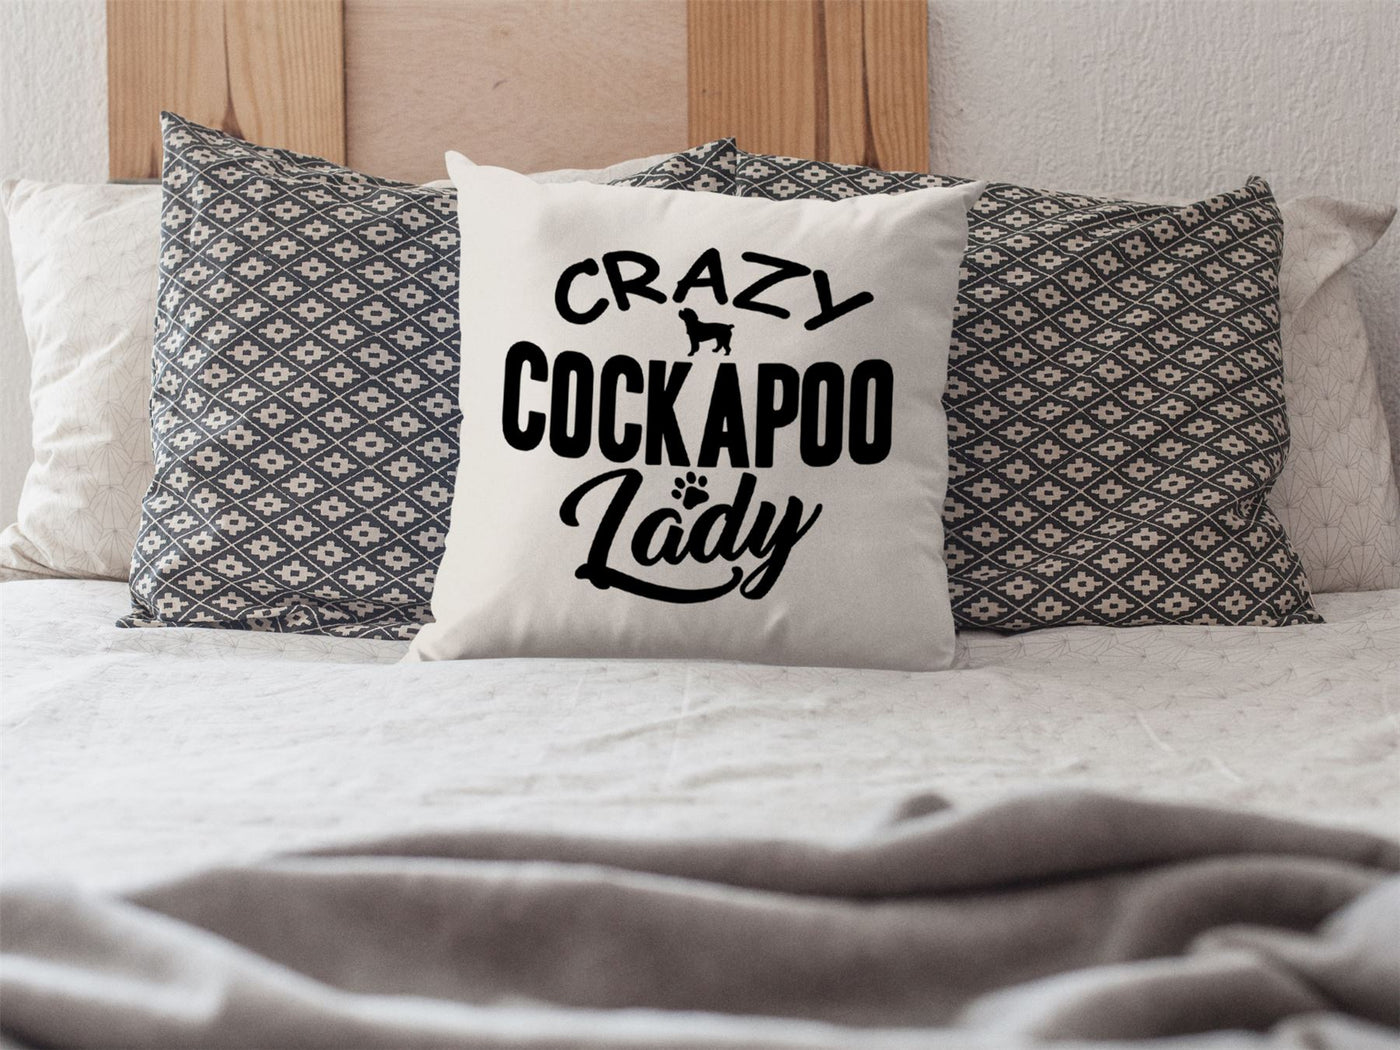 Crazy Cockapoo Lady Cushion Cover - Pet Dog owner Doggy Mum Puppy